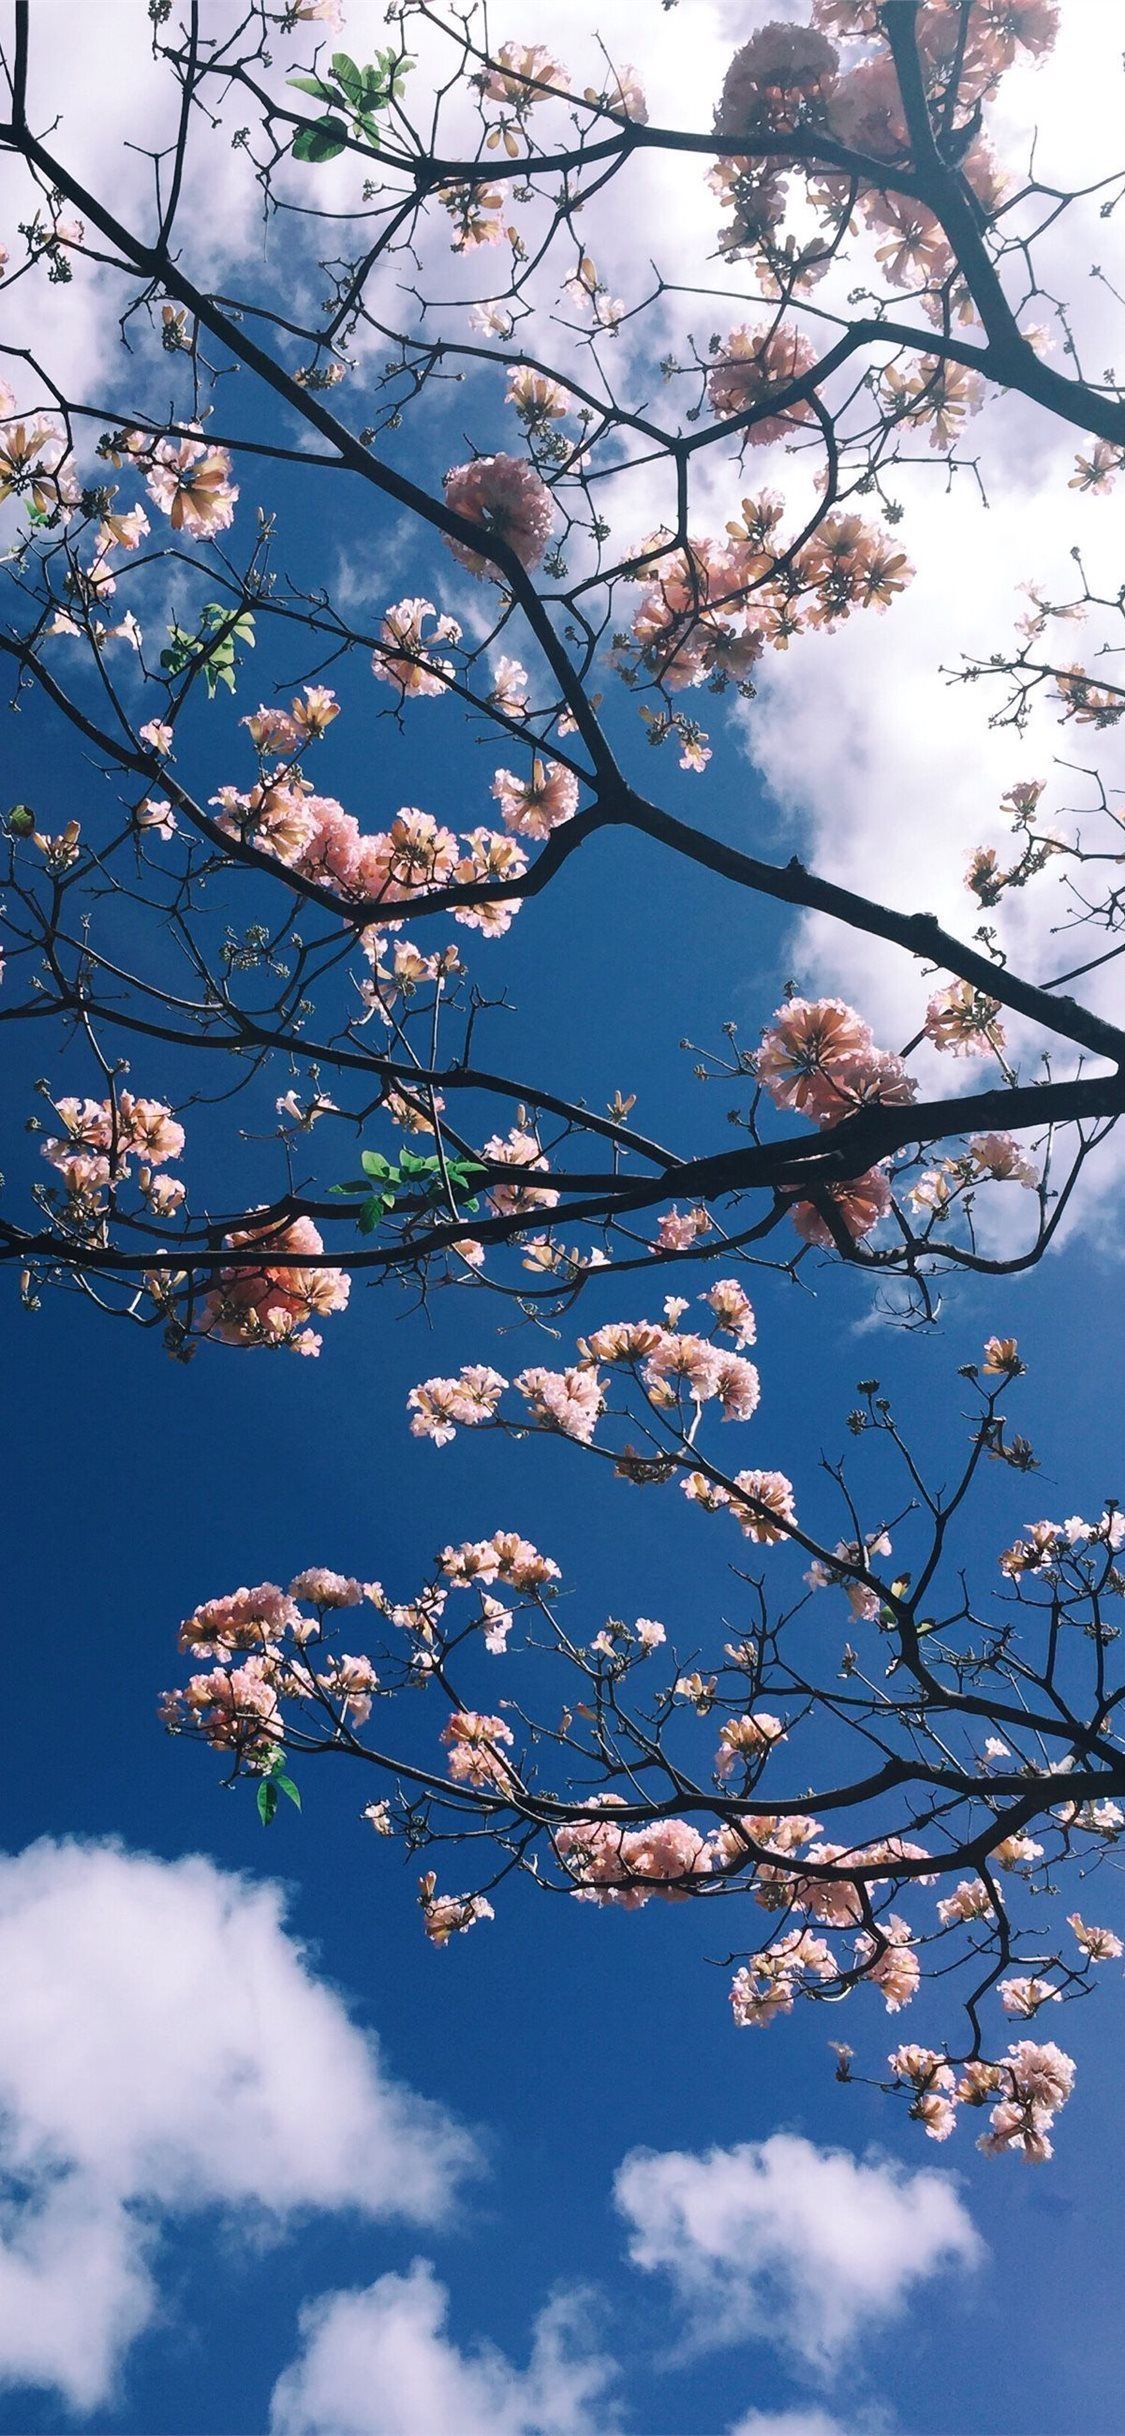 A tree with pink flowers against a blue sky - Korean, Seoul